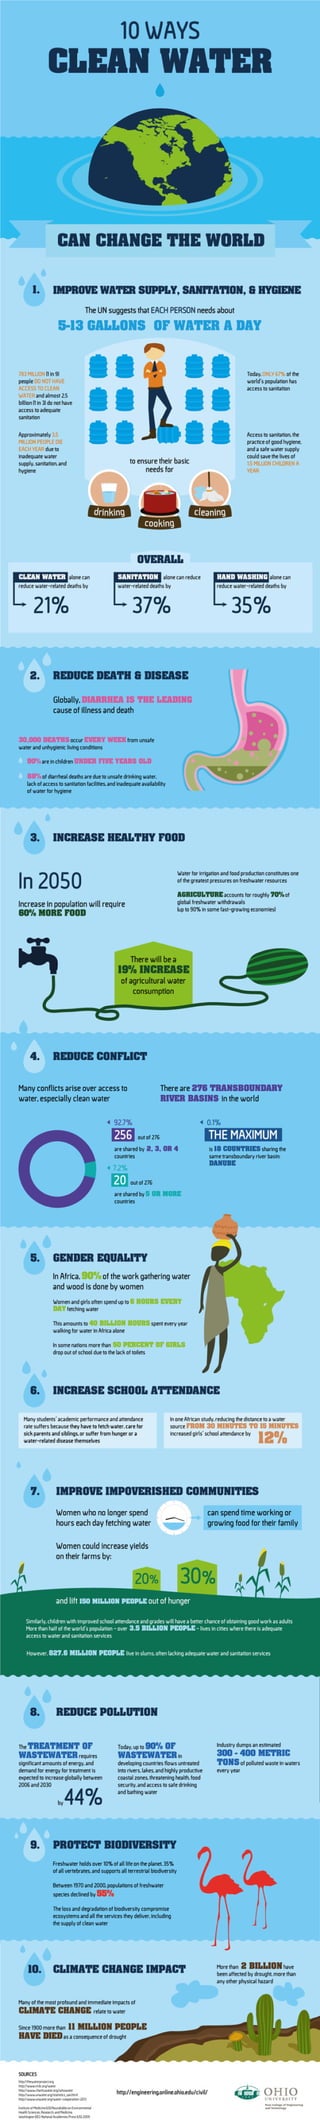 Want a glass of water? I'll be back in 6 hours - Clean water infographic